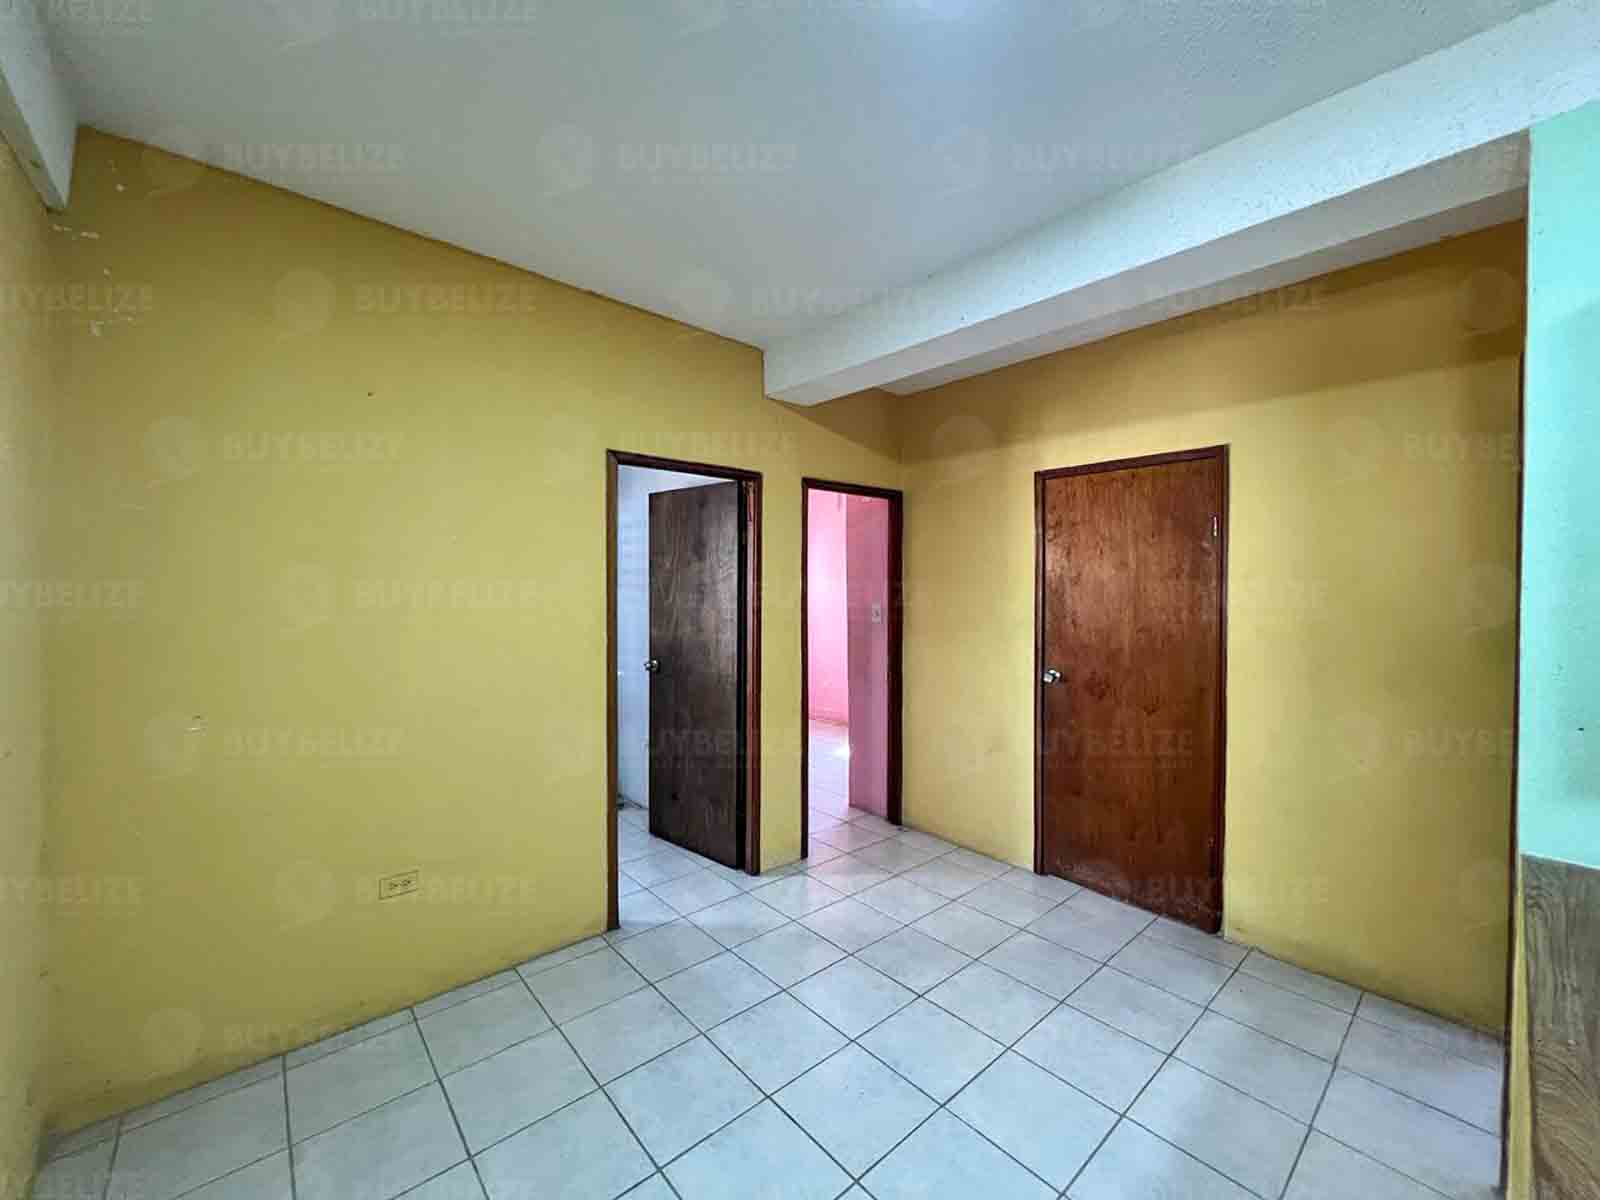 3 bedrooms 1 bath Downstairs Apartment for Rent in Belize City